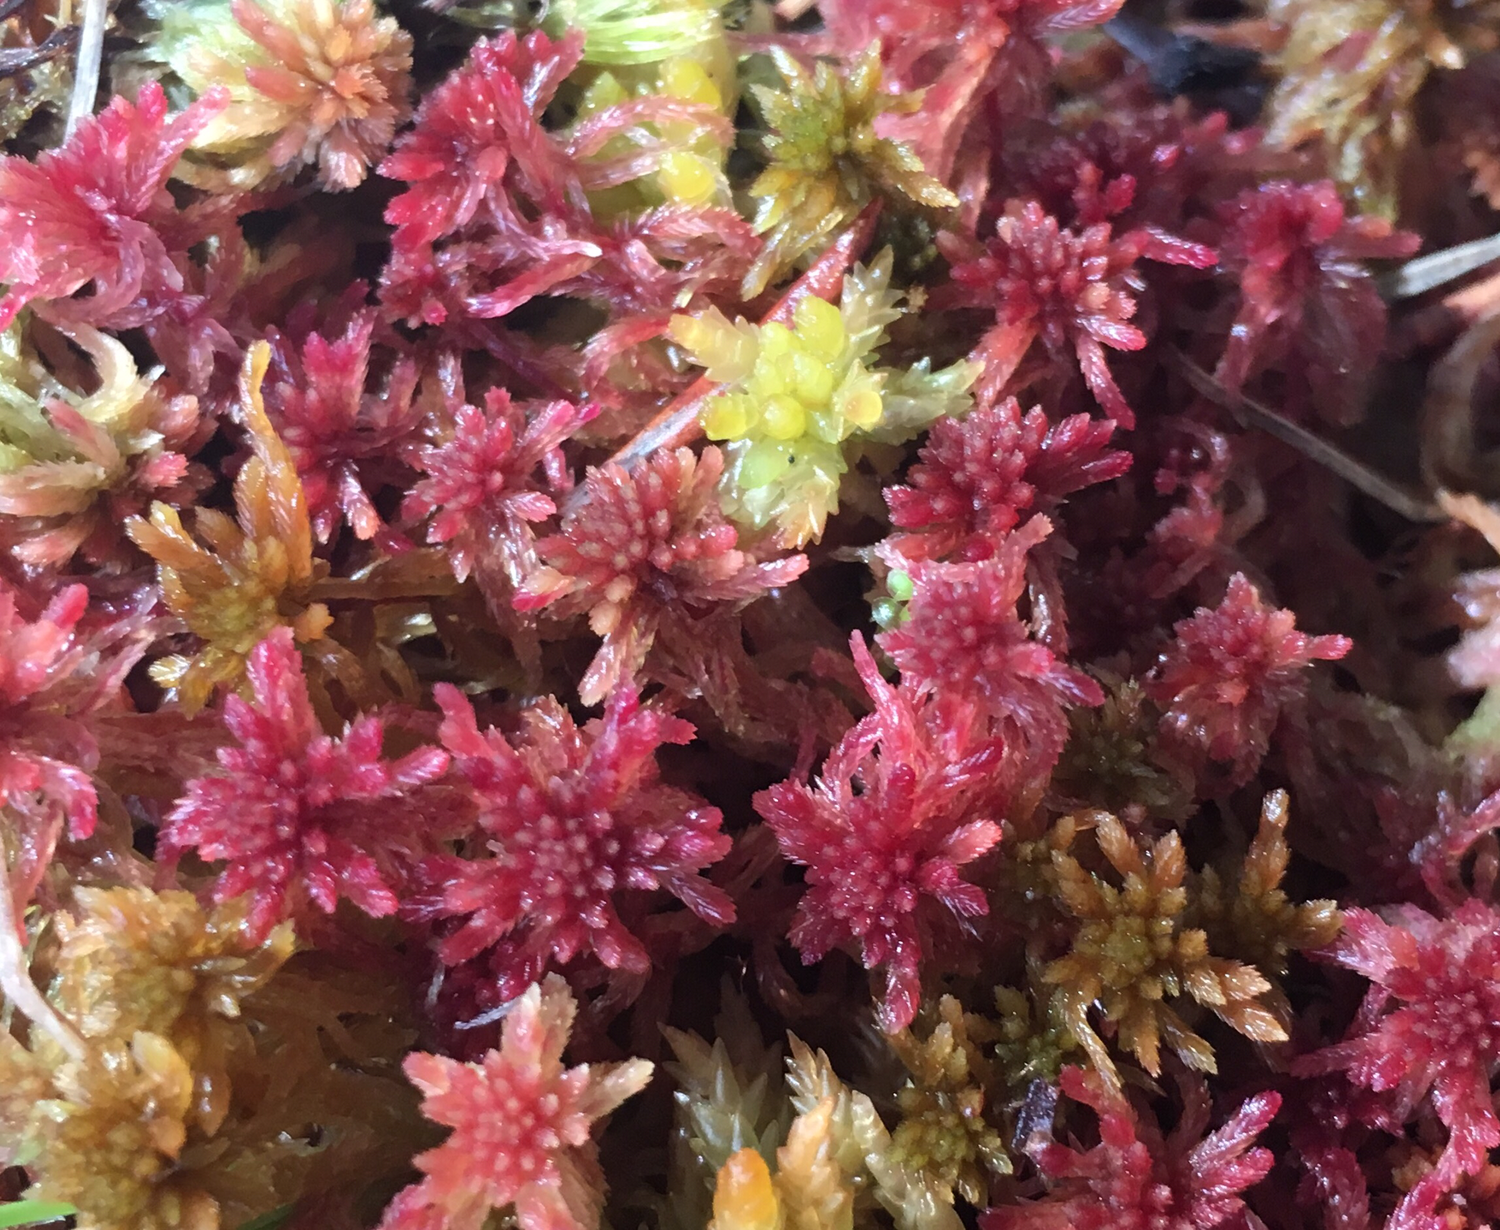 Live Red/ Brown/ Green Species Sphagnum Moss mix